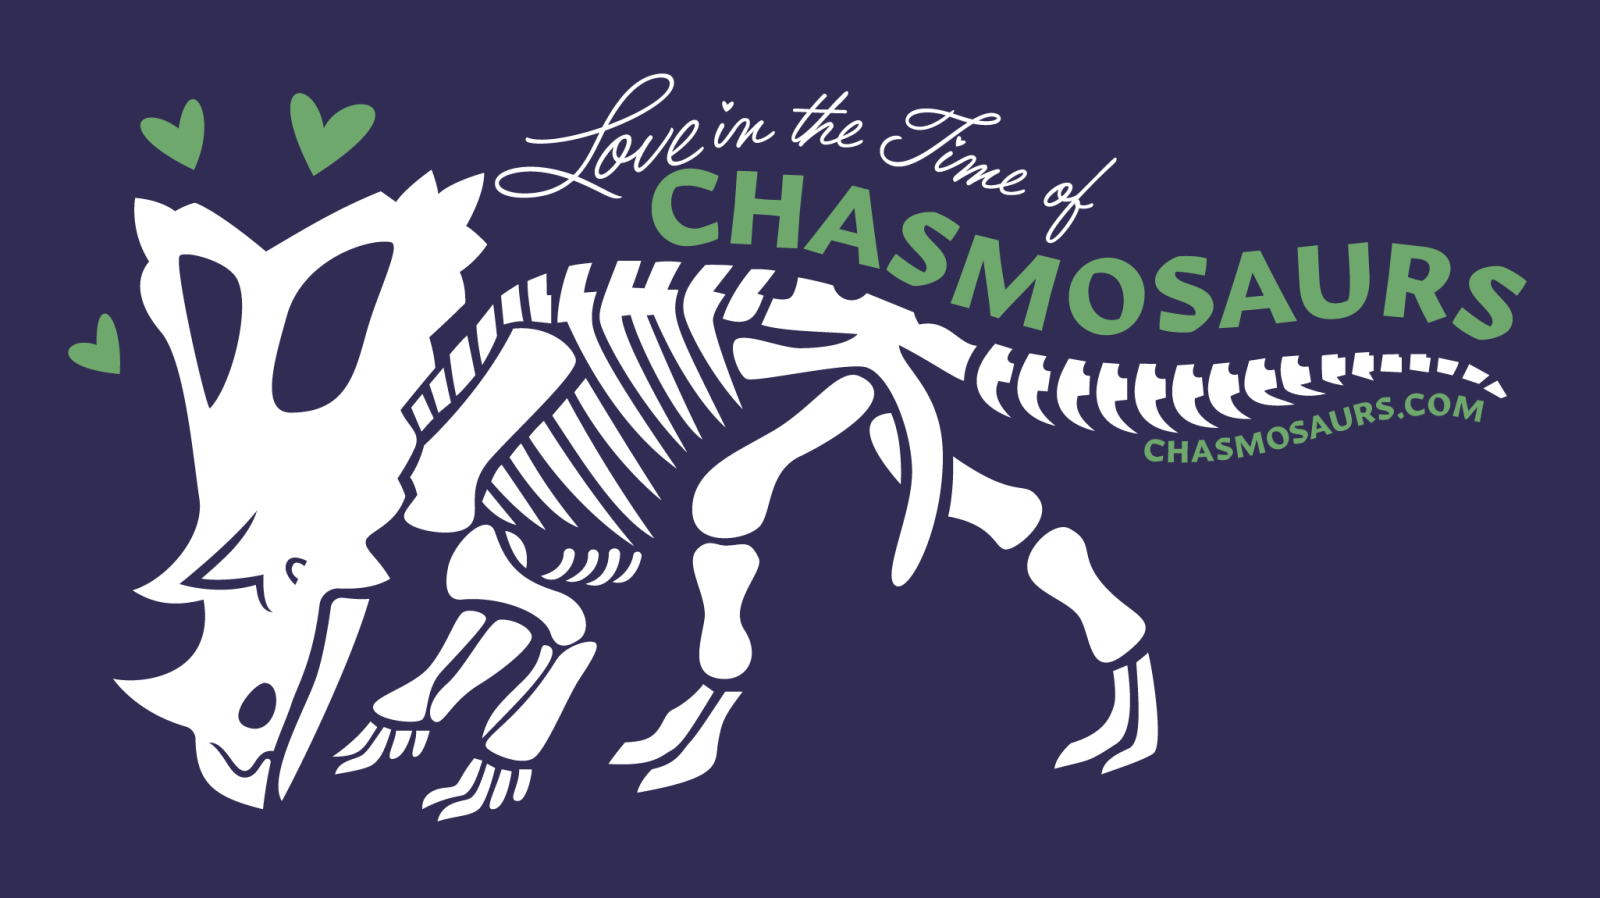 A stylized image of a chasmosaurus skeleton with the text "Love in the Time of Chasmosaurs" along its back and tail. The URL chasmosaurs.com is written along the bottom of the tail. The skeleton is white and the text is green and white. The background color is purple.